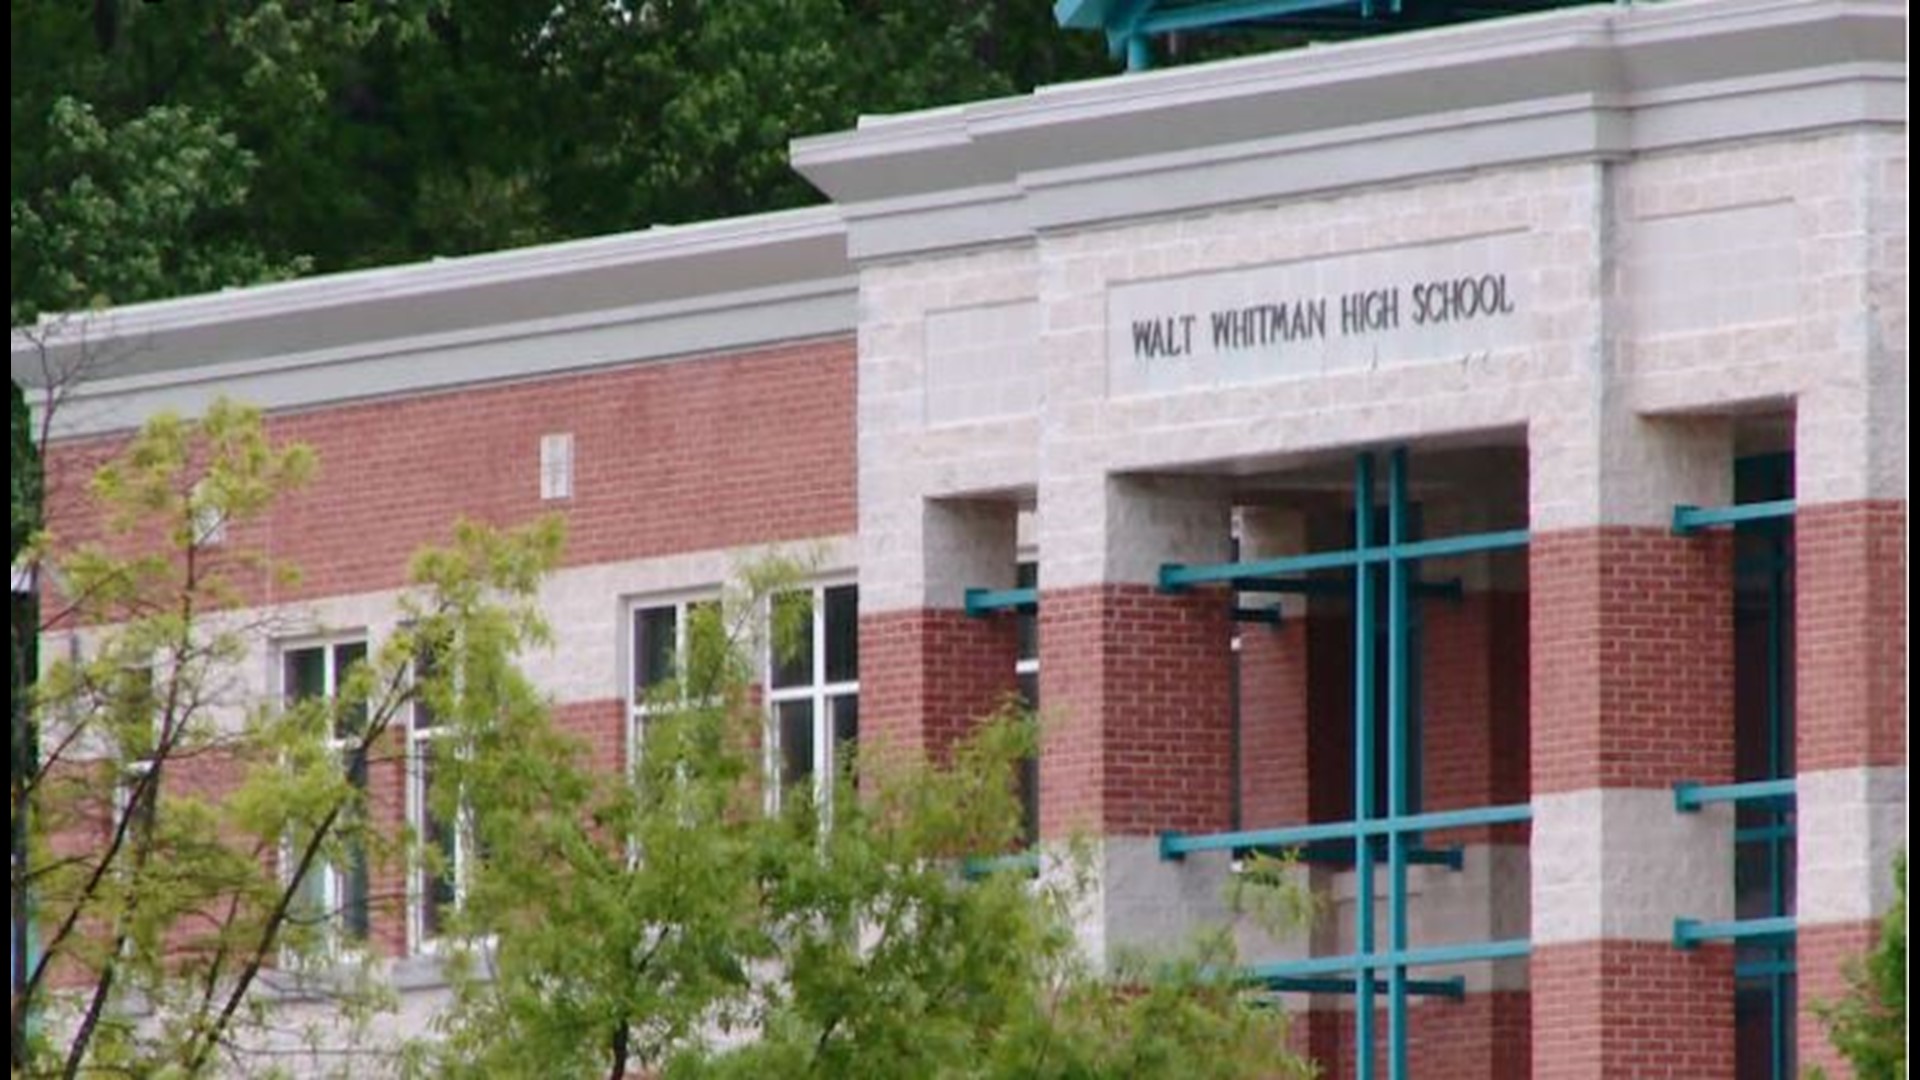 The program, OneWhitman, was designed to further the school's "vision of eliminating racism and all other forms of hate speech." This comes after last school year ended in controversy. Two students posted a photo of themselves on social media in blackface, describing themselves using the N-word.